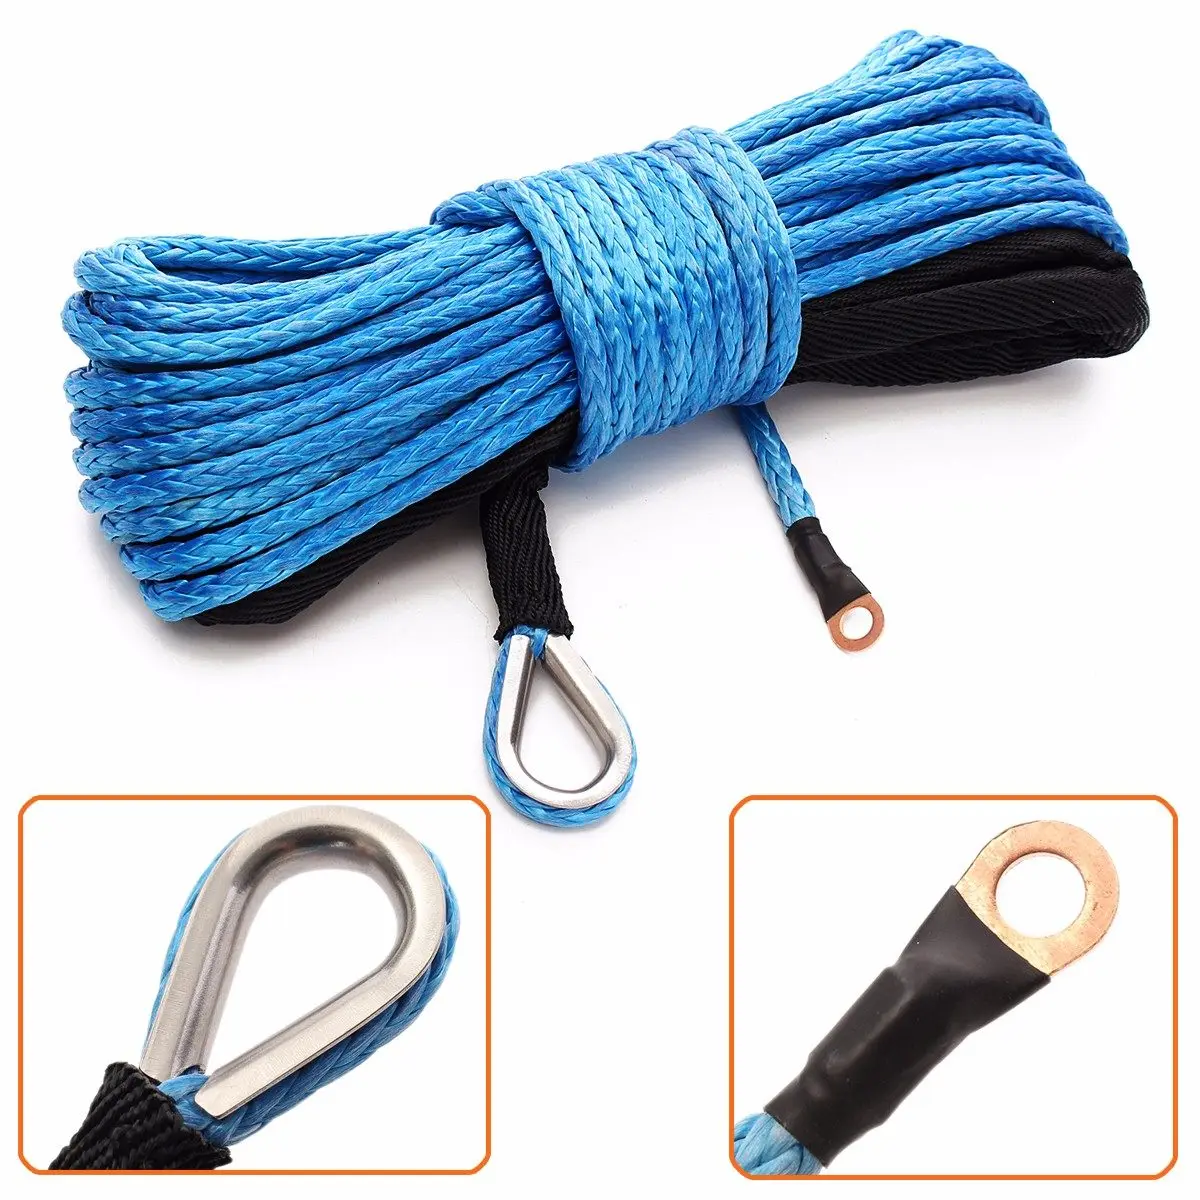 

1/4" x 50' 7700LBs Synthetic Fiber Winch Line Cable Towing Rope With Sheath ATV UTV Blue Traction Rope Solid